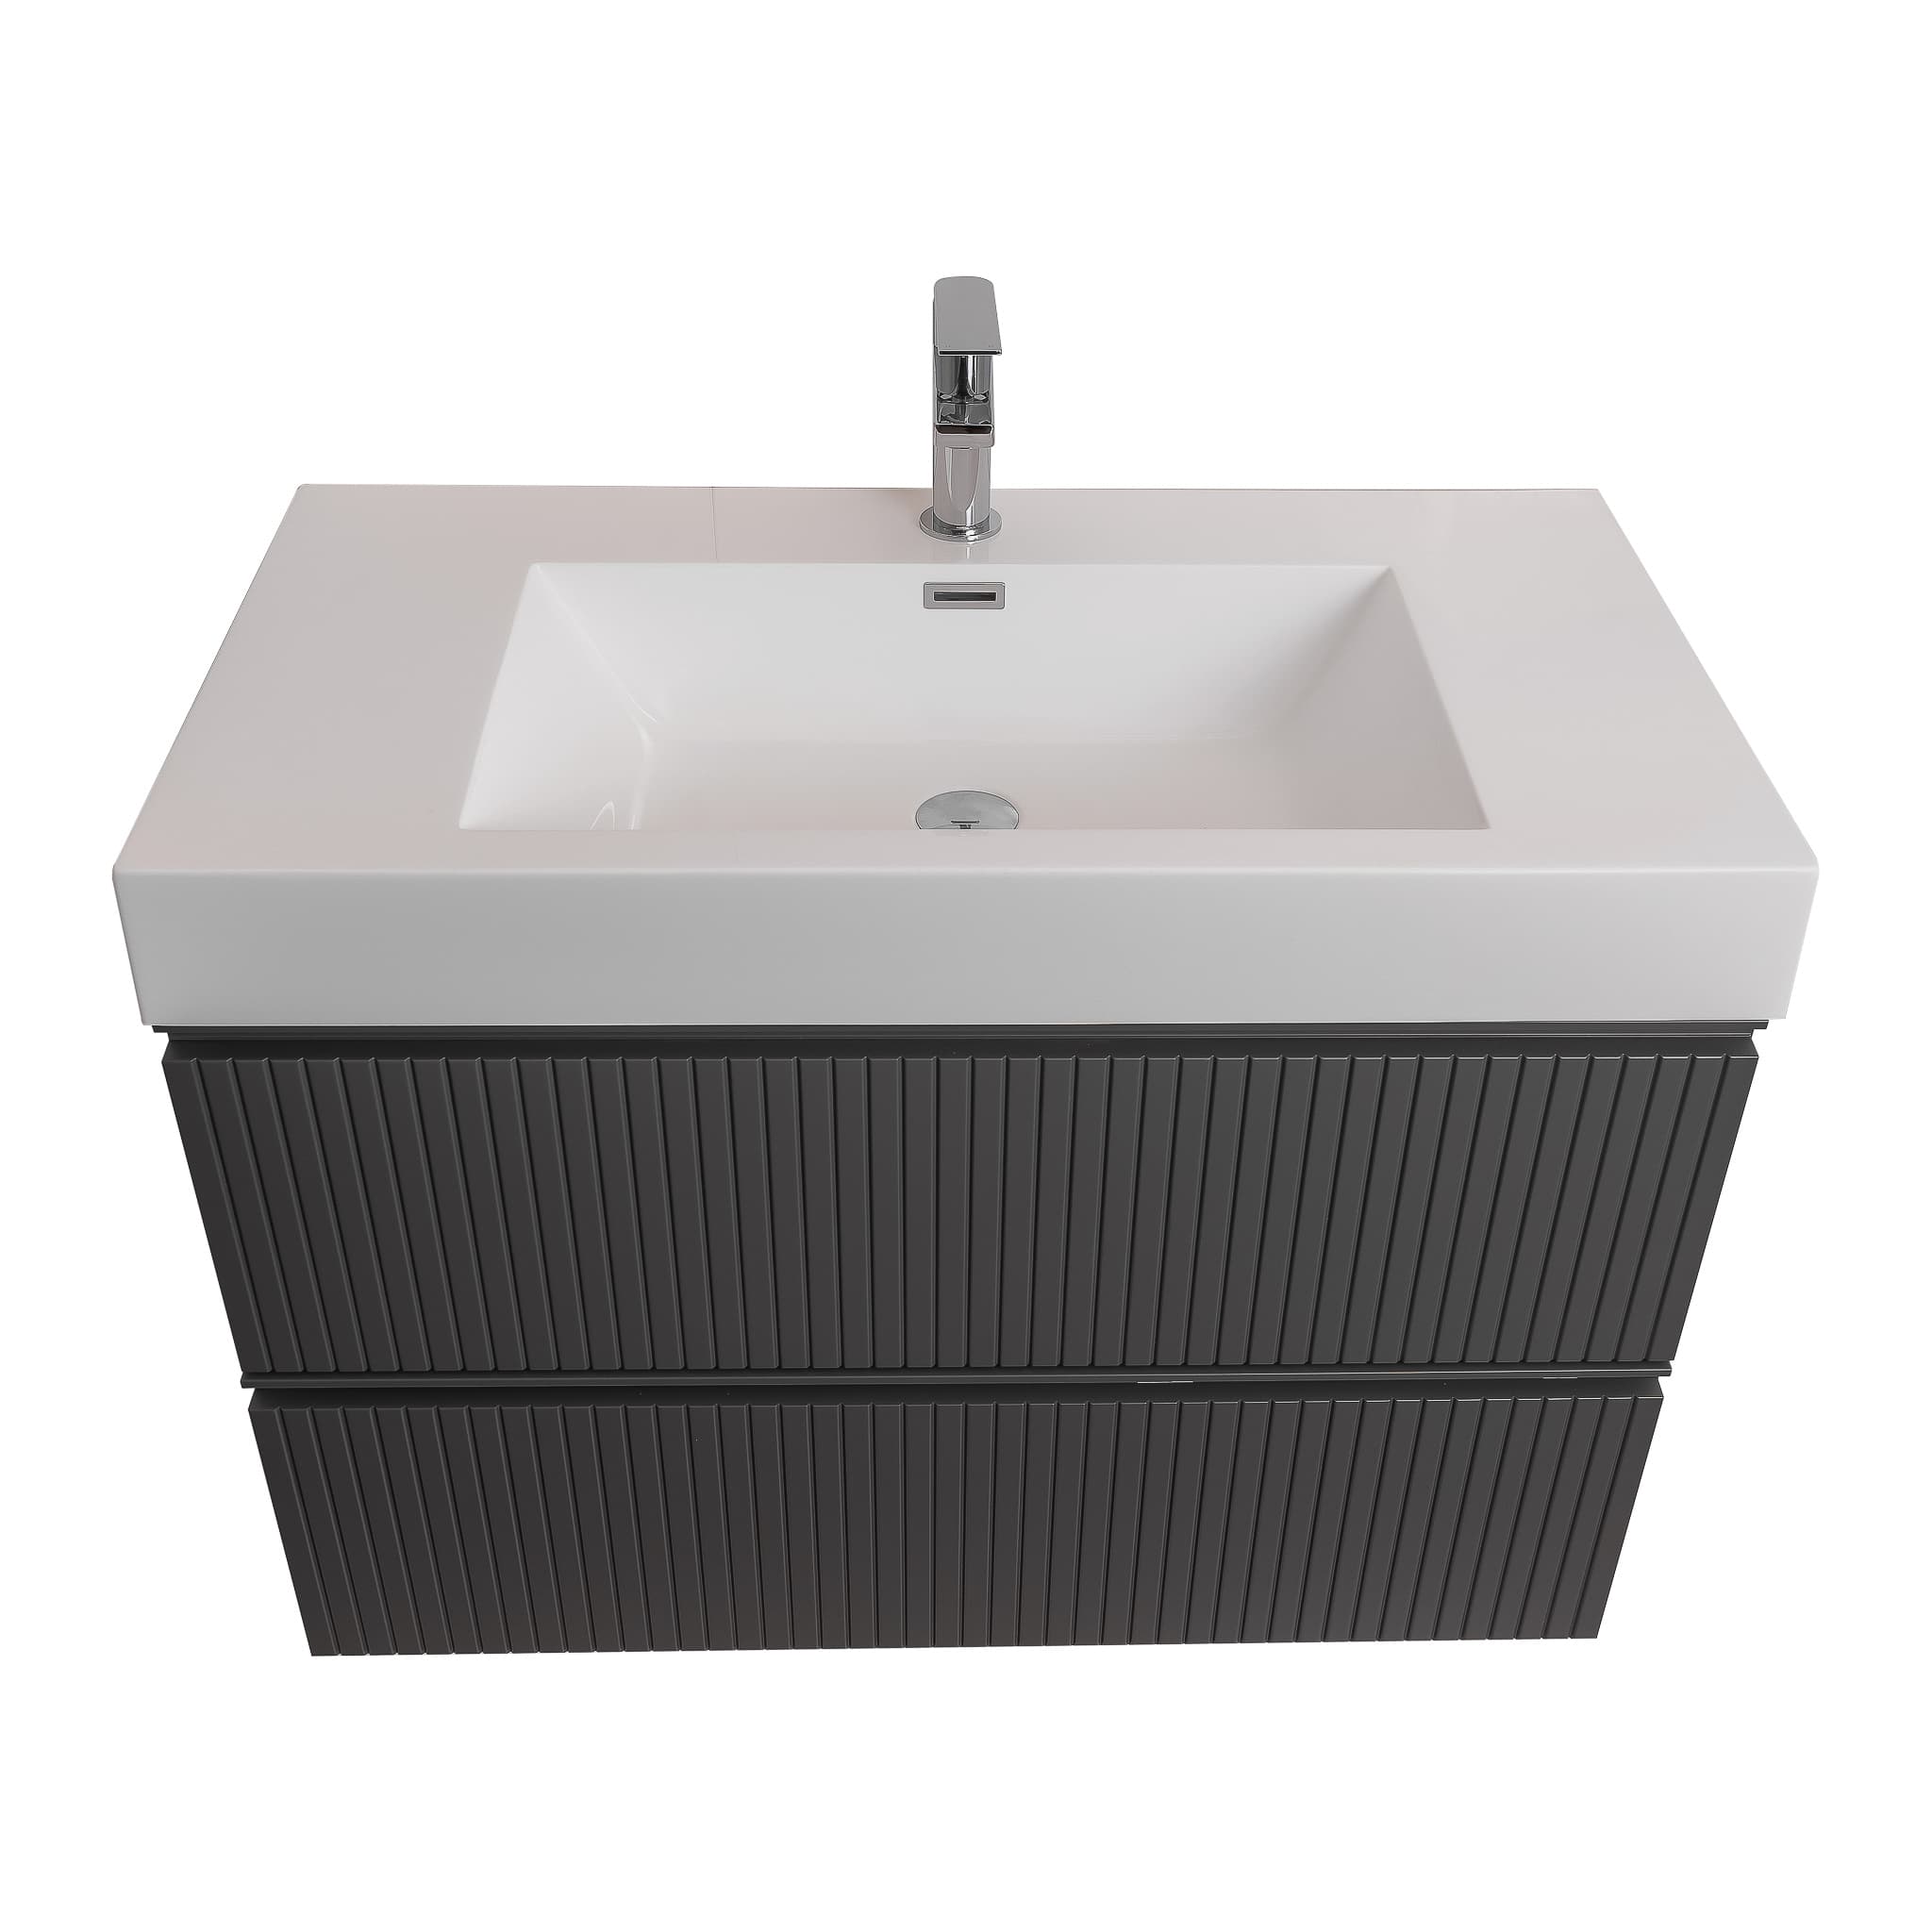 Ares 39.5 Matte Grey Cabinet, Square Cultured Marble Sink, Wall Mounted Modern Vanity Set